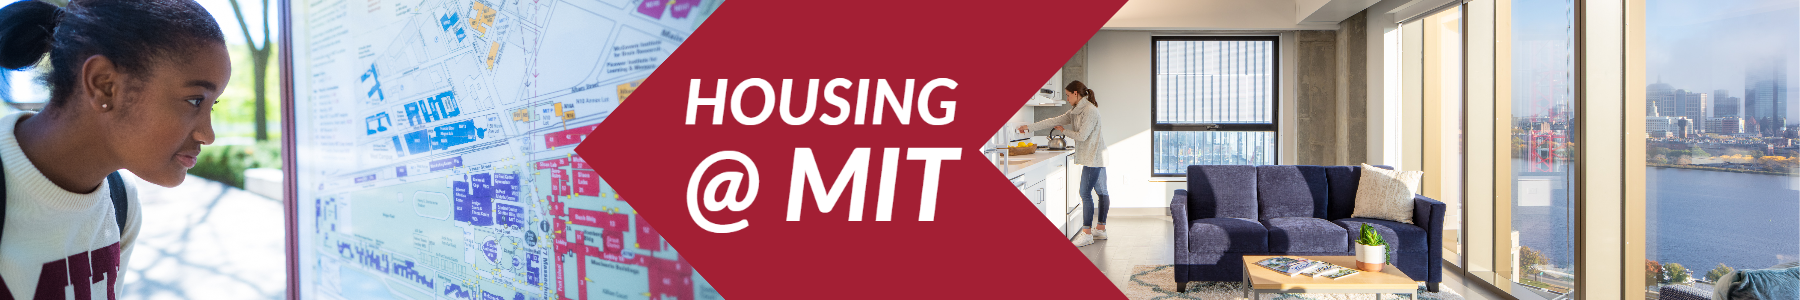 Image of person looking at a campus map and an image of a one bedroom apartment within the Graduate Tower at Site 4 with the text "Housing @ MIT"